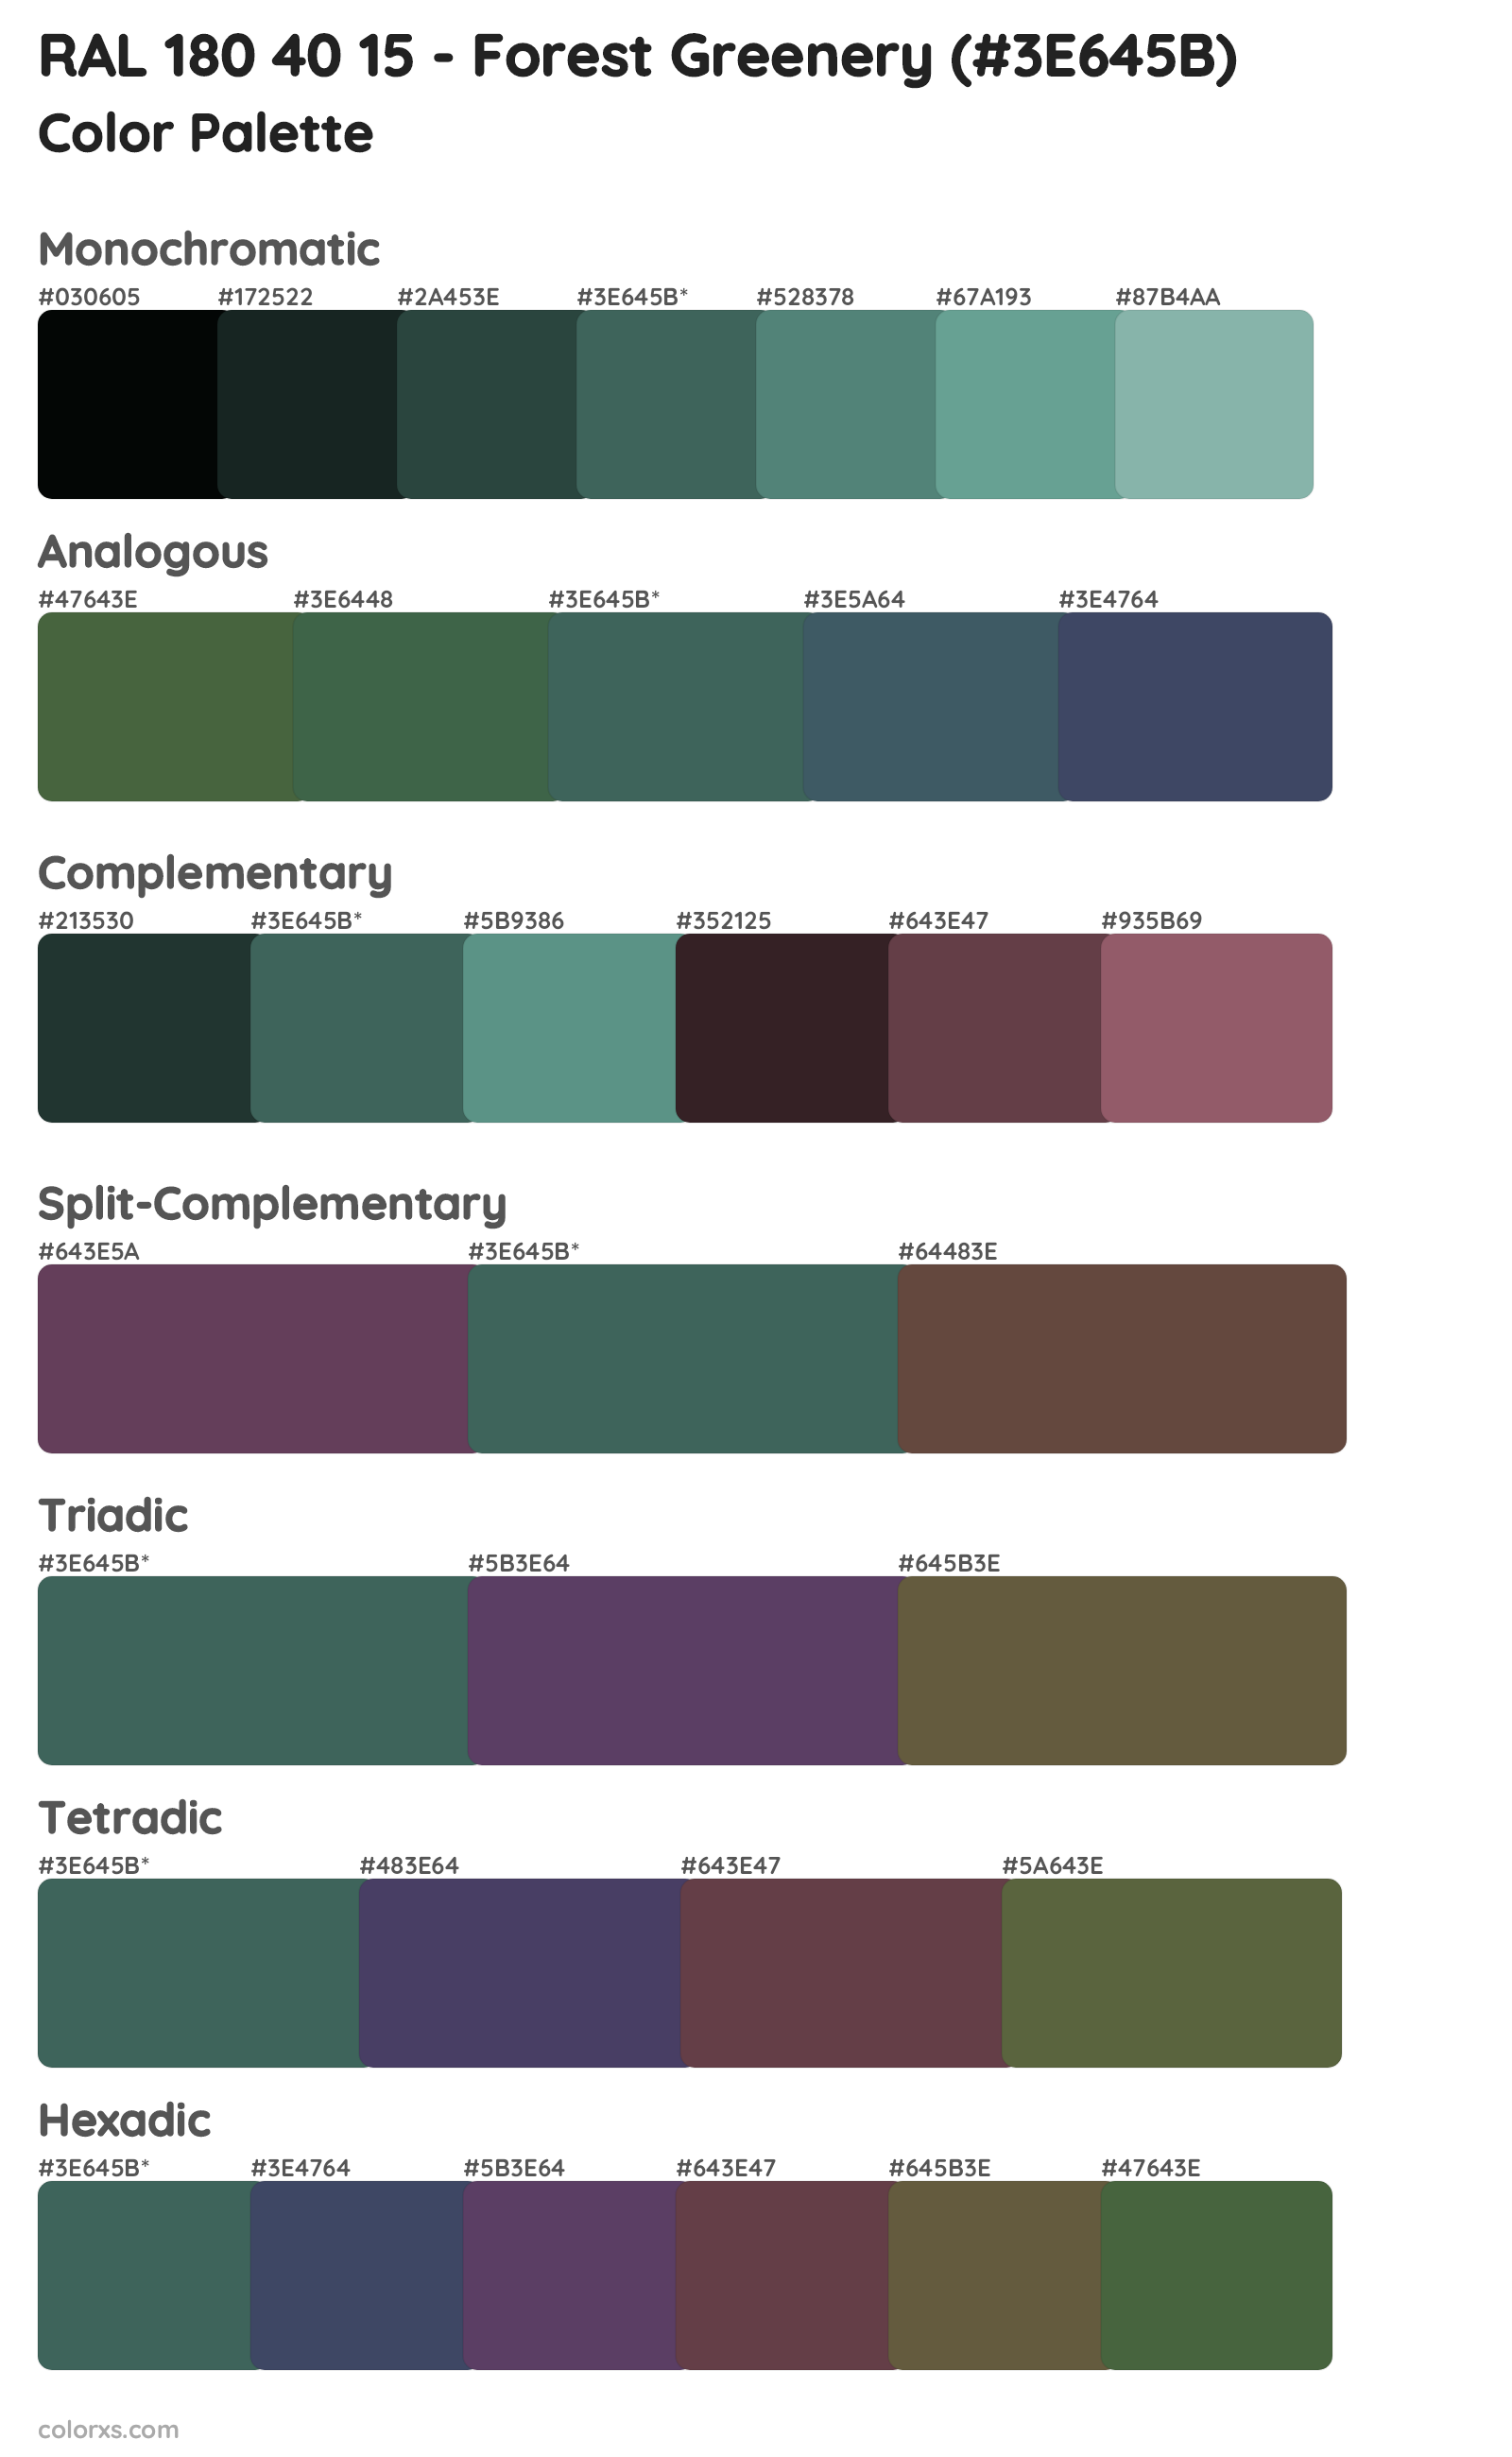 RAL 180 40 15 - Forest Greenery Color Scheme Palettes